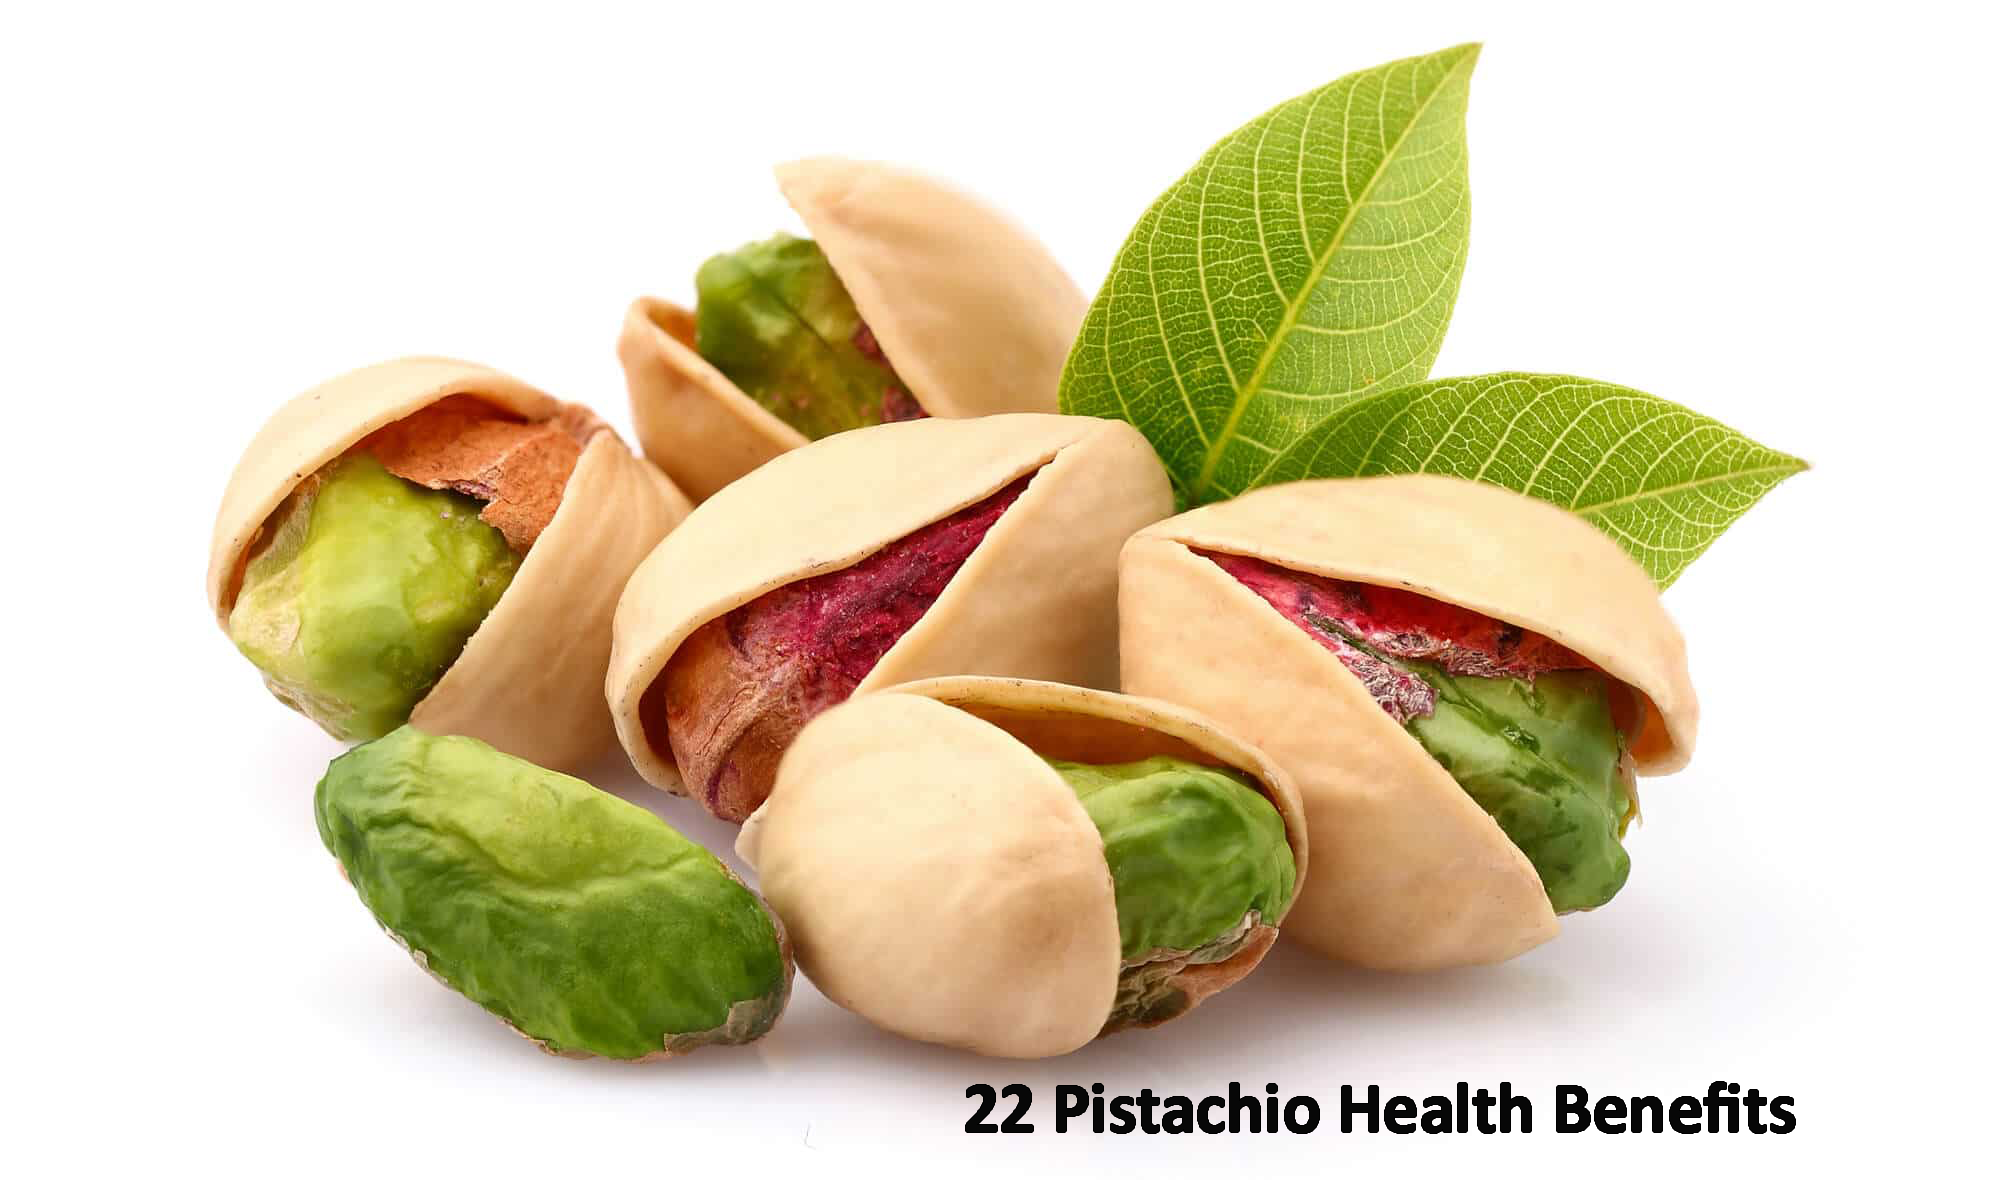 Pistachio Nuts and their 22 Health Benefits